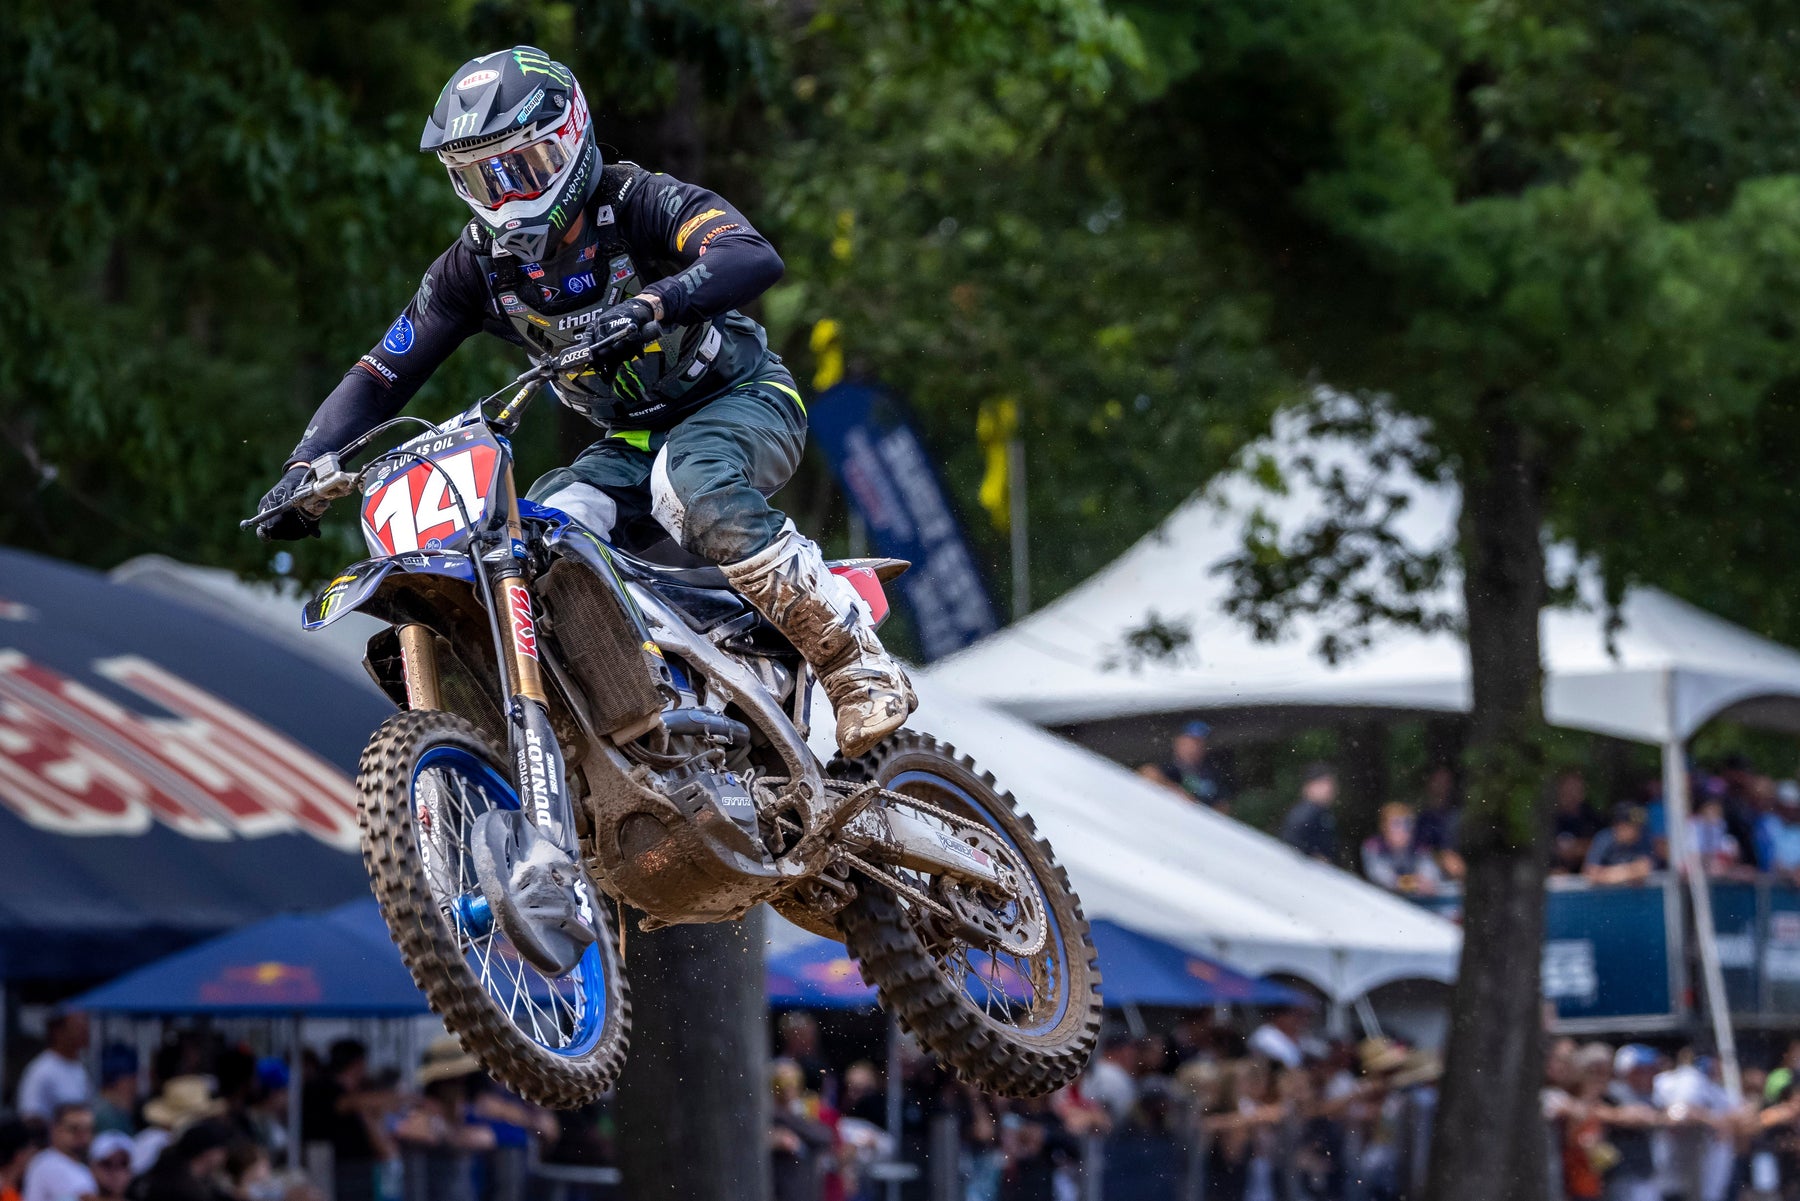 HIGH-FLYING DYLAN FERRANDIS POWERS TO AMA 450MX VICTORY AT SOUTHWICK NATIONAL, MASSACHUSETTS